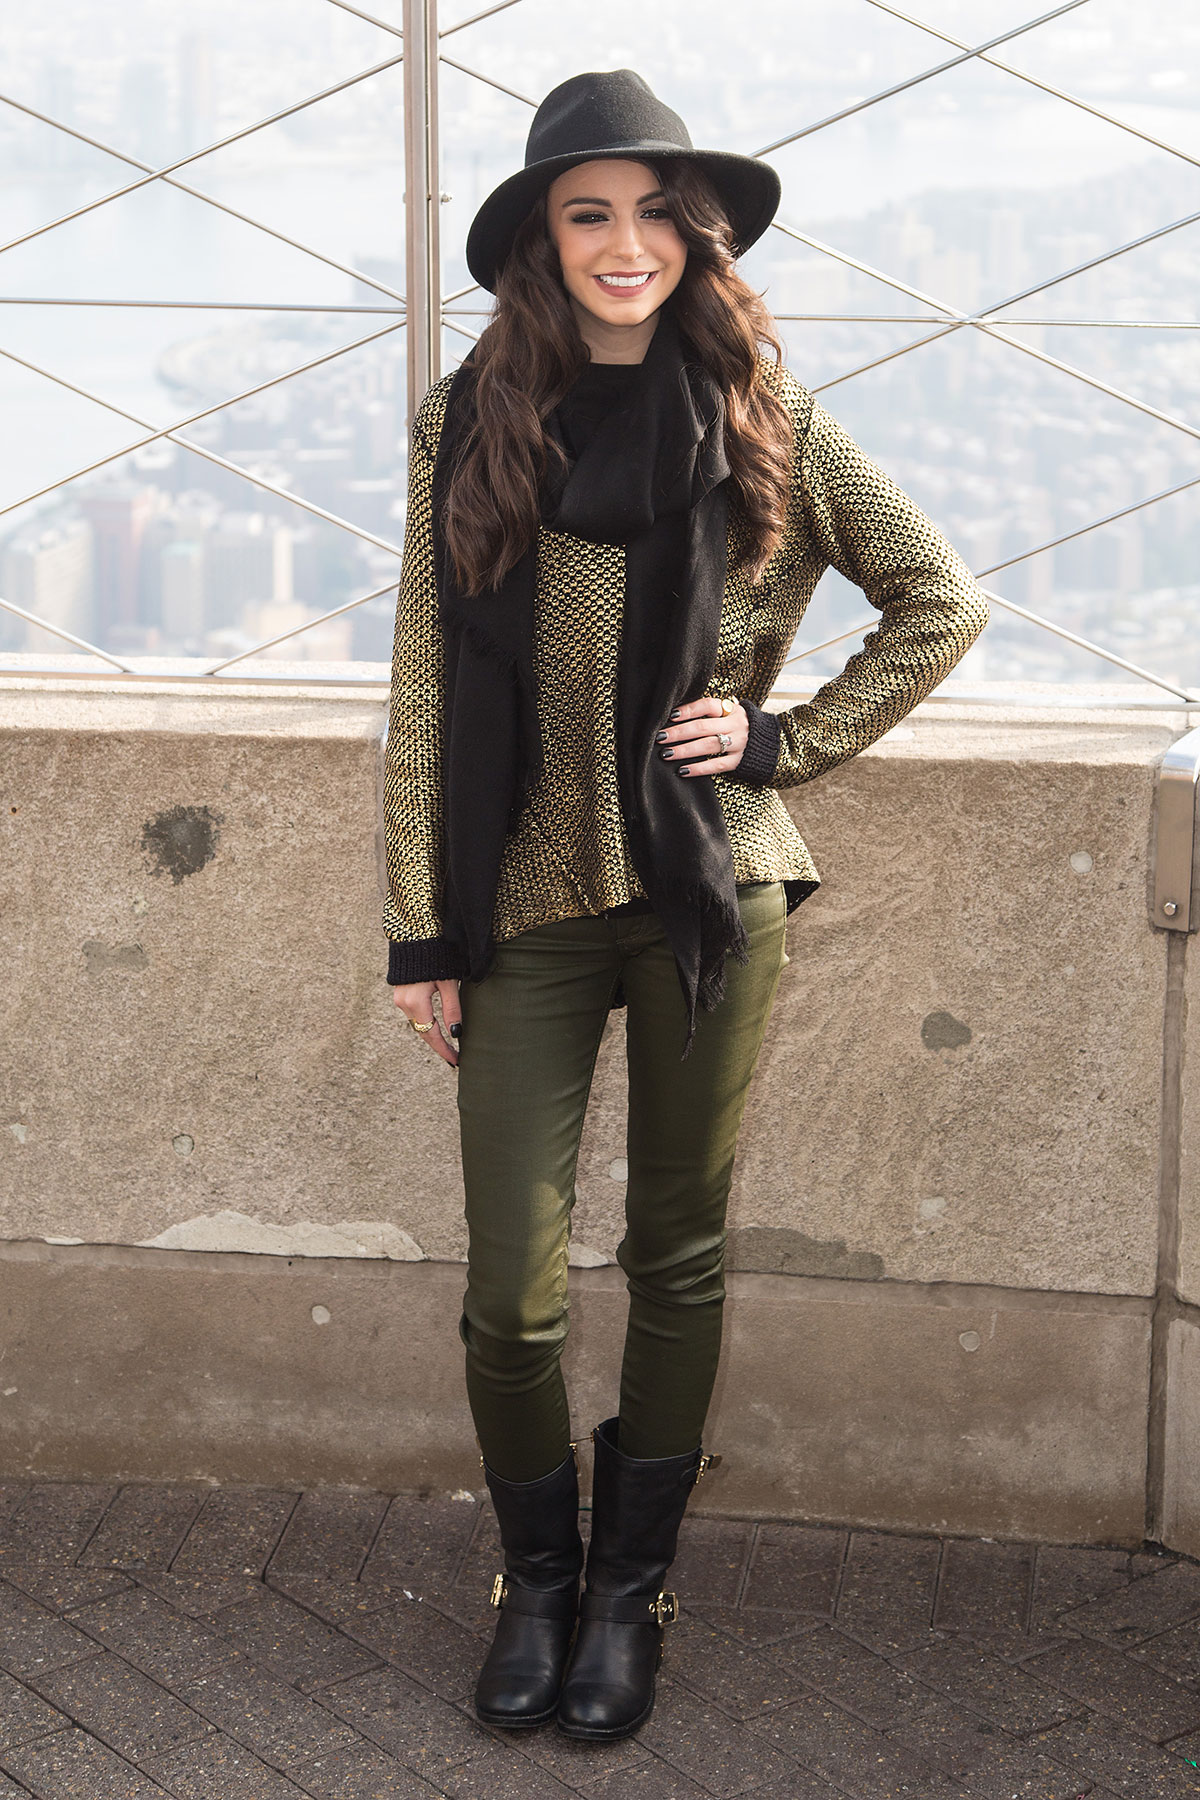 Cher Lloyd hosted by the Empire State Building